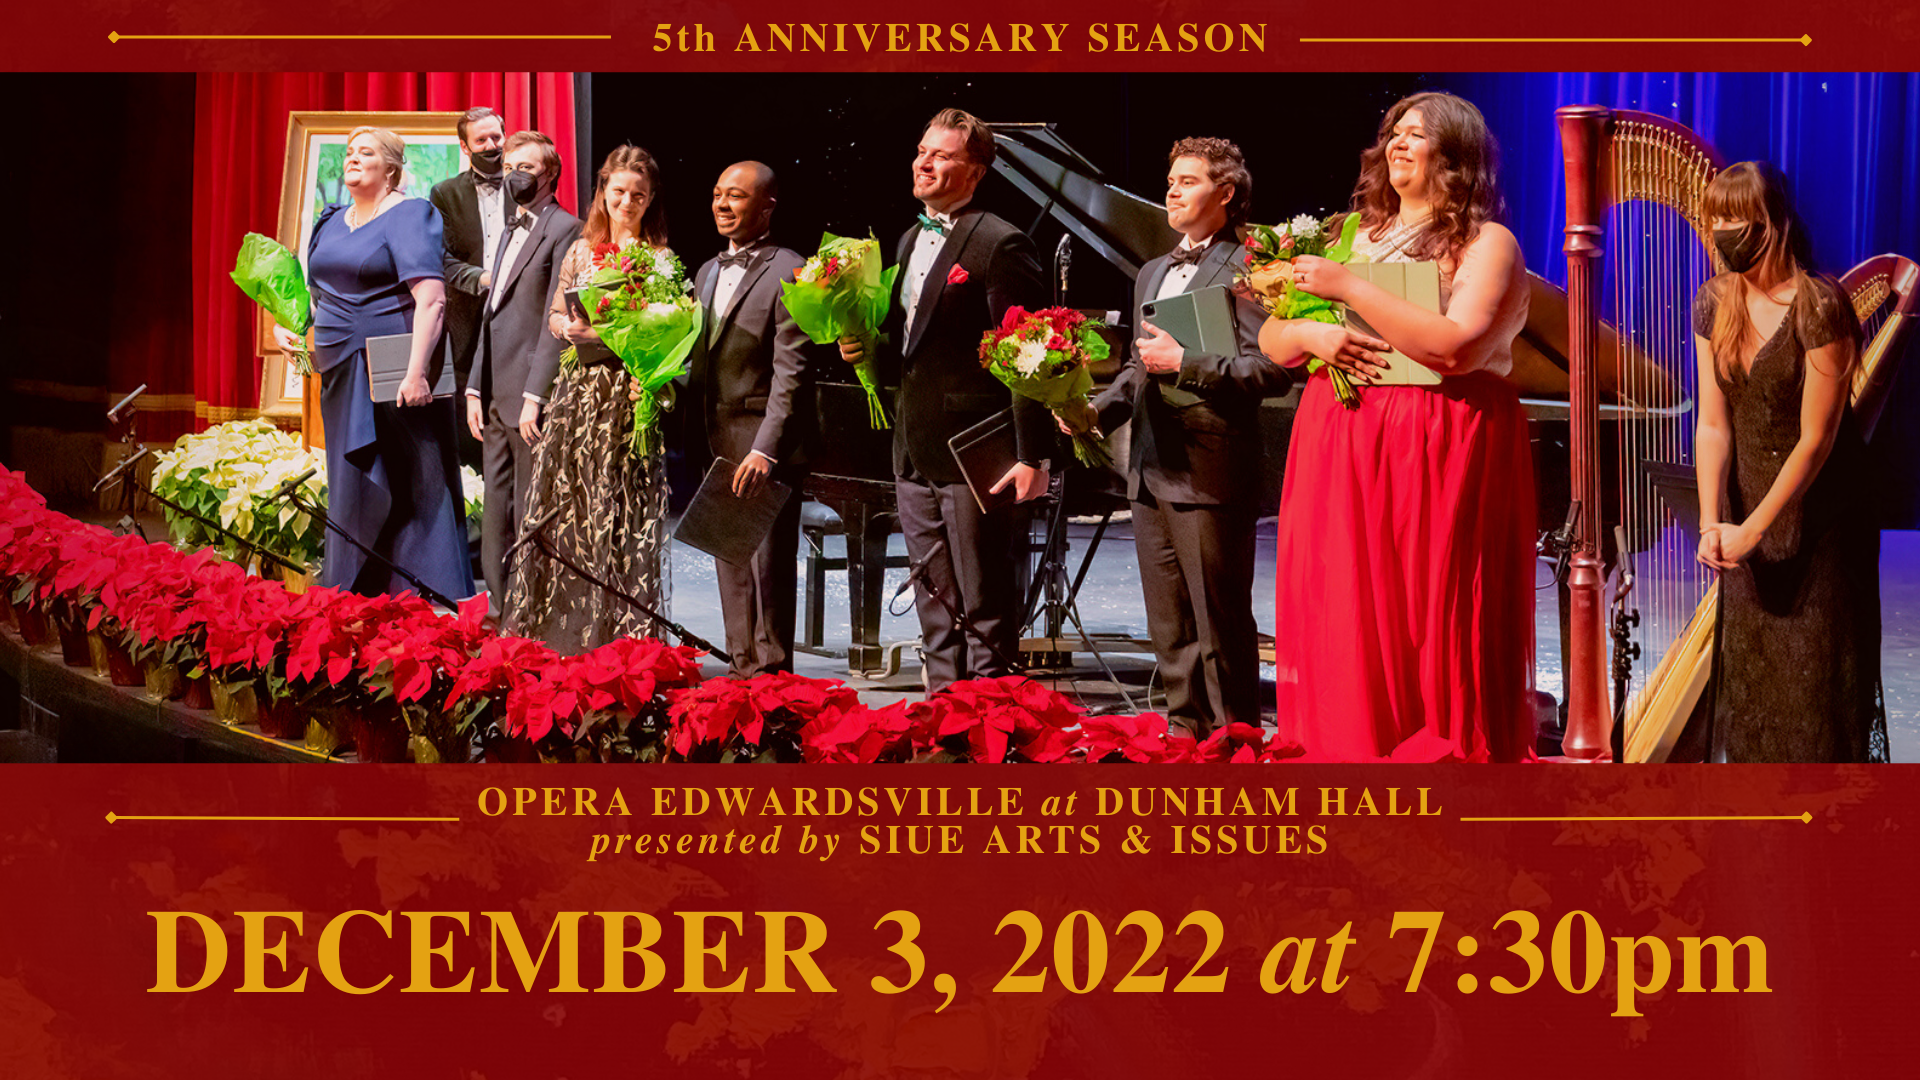 Opera Edwardsville Returns to SIUE for 5th Anniversary Celebration and Holiday Concert as part of the Arts & Issues Series